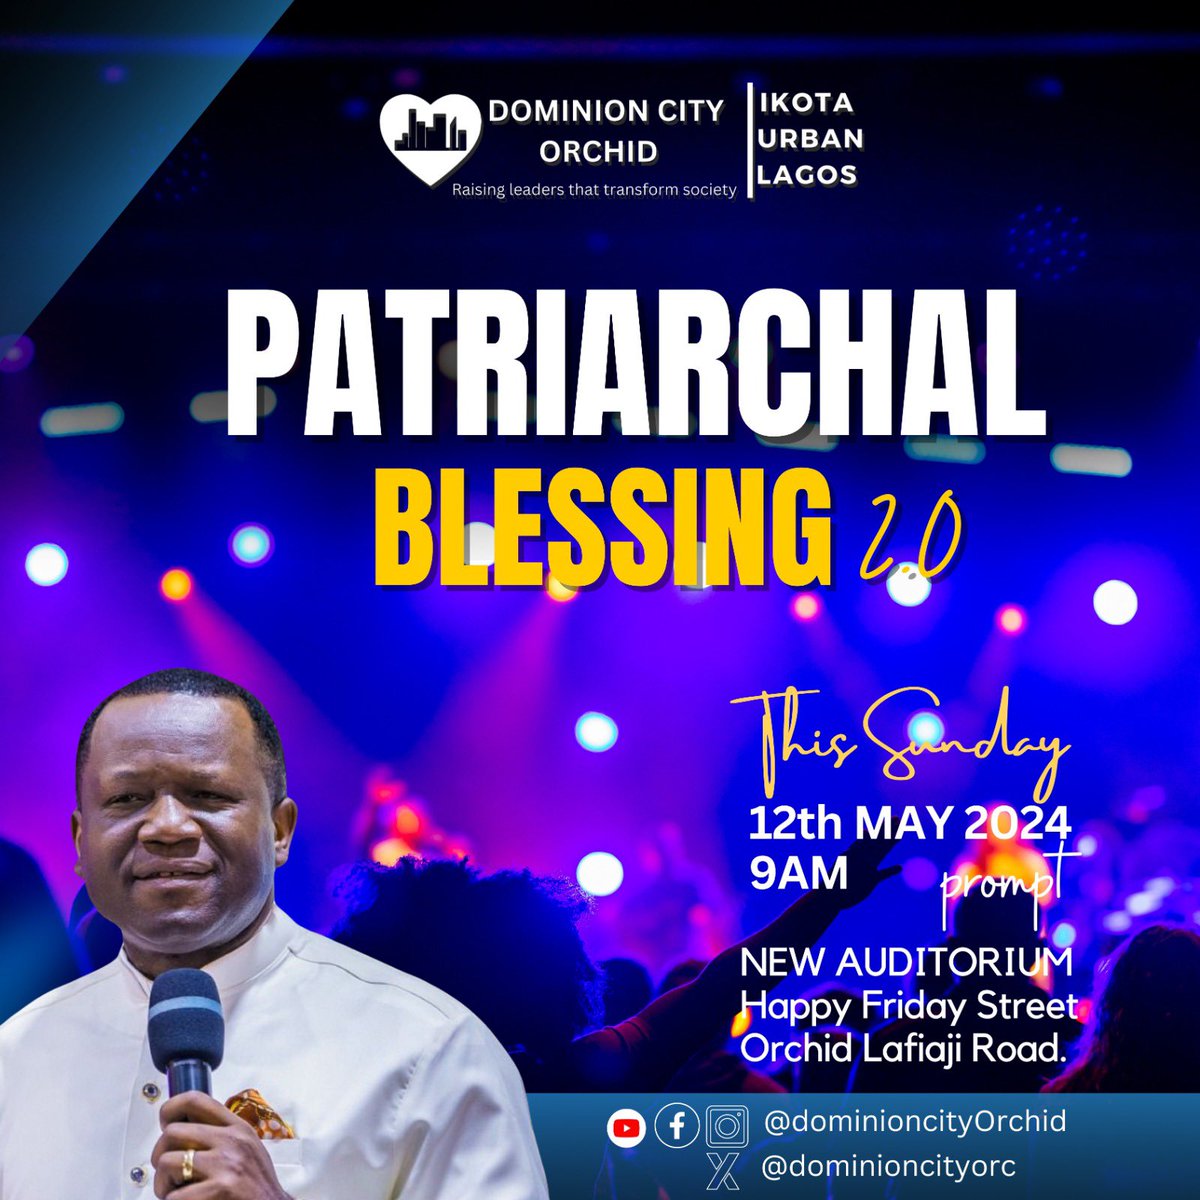 Join us again tomorrow morning at dominion city orchid by 9:00am as we will receive the patriarchal blessing from our pastor. Don’t come alone. #Dominioncityorchid #DominionCity #dominioncityglobal #blessing